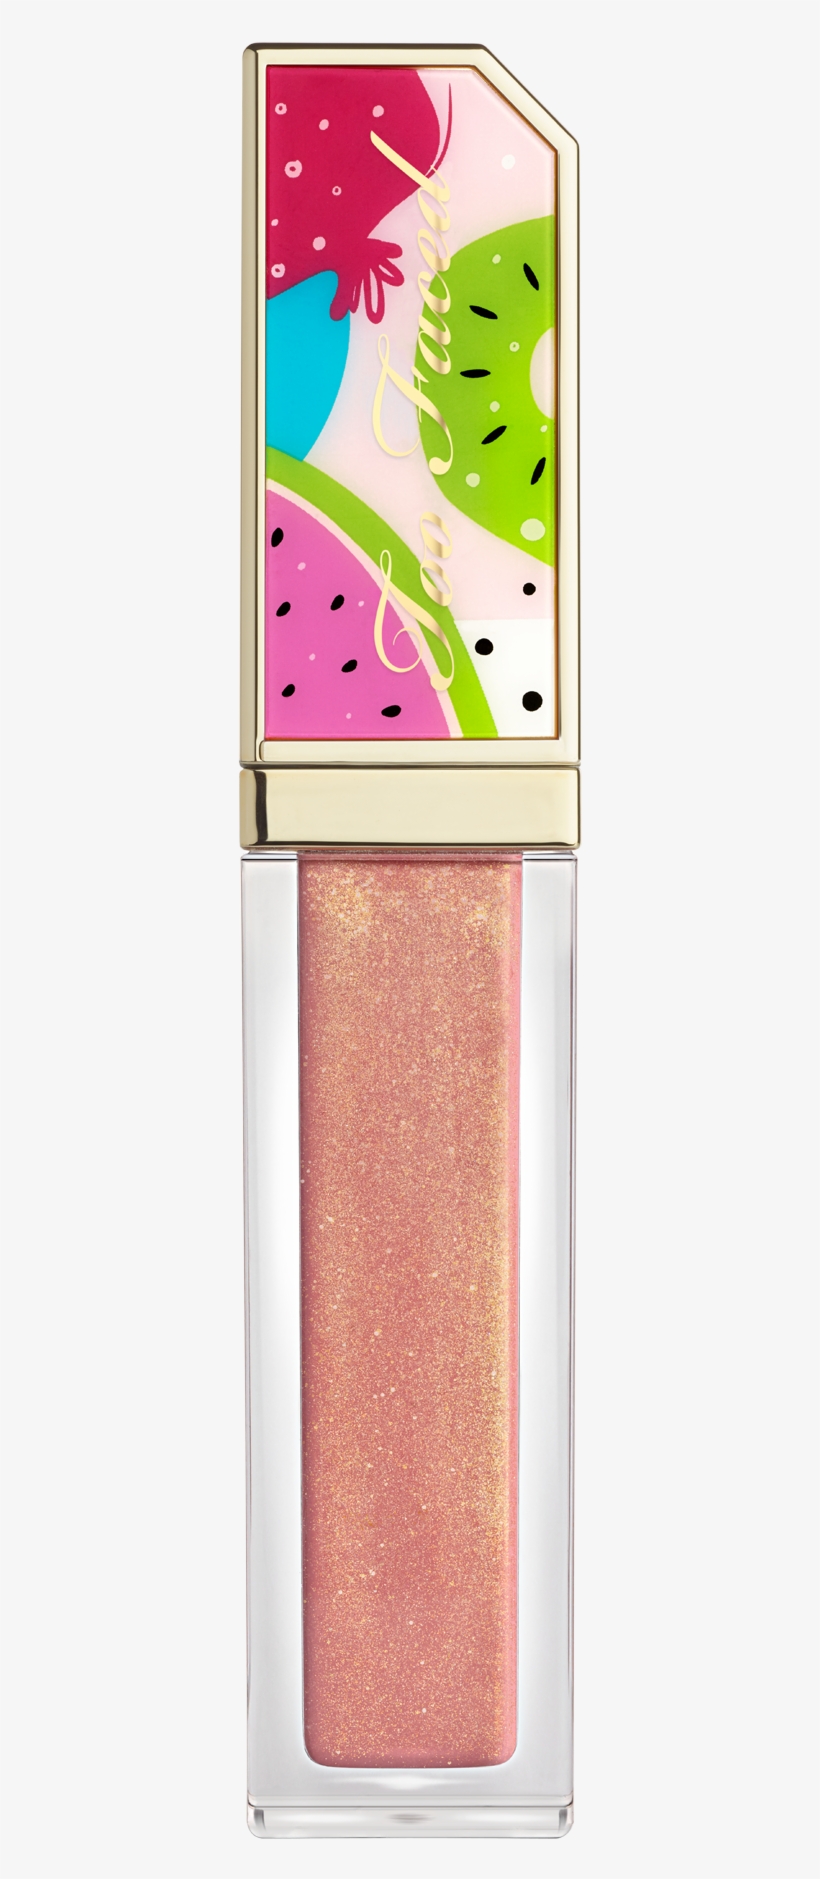 Images - Previous - Strawberry - Pineapple, transparent png #4080181